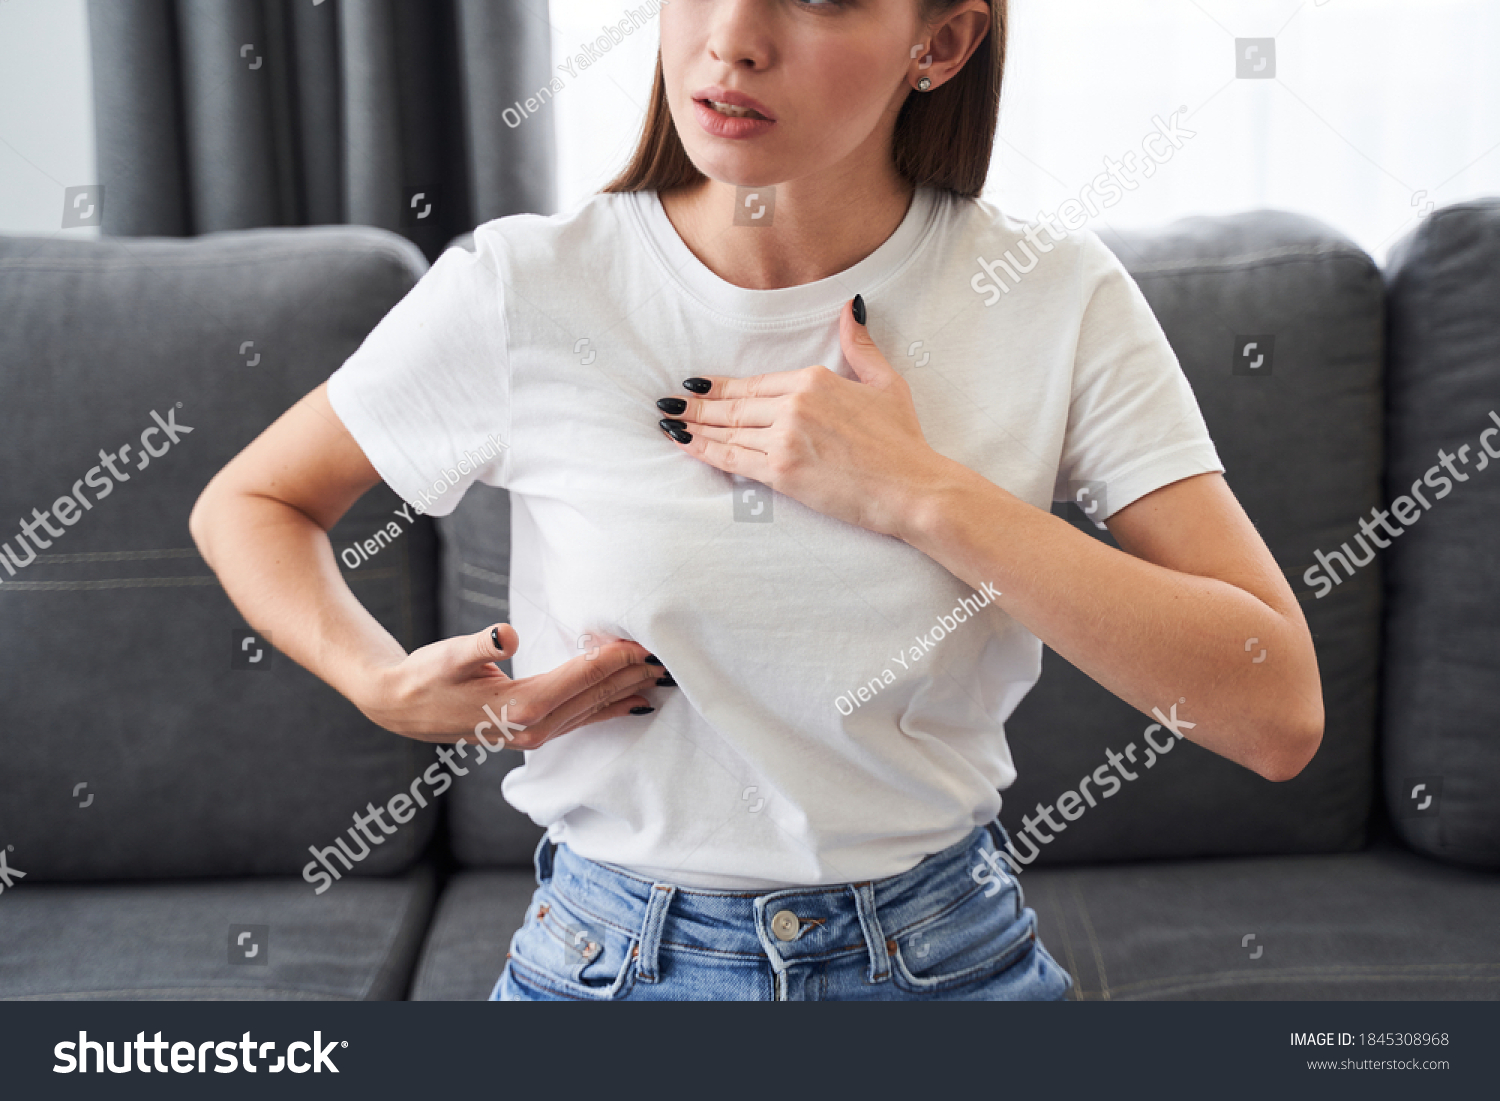 Worried caucasian woman carefully looking and checking breast by herself that she concern about breast cancer. Breast cancer concept #1845308968